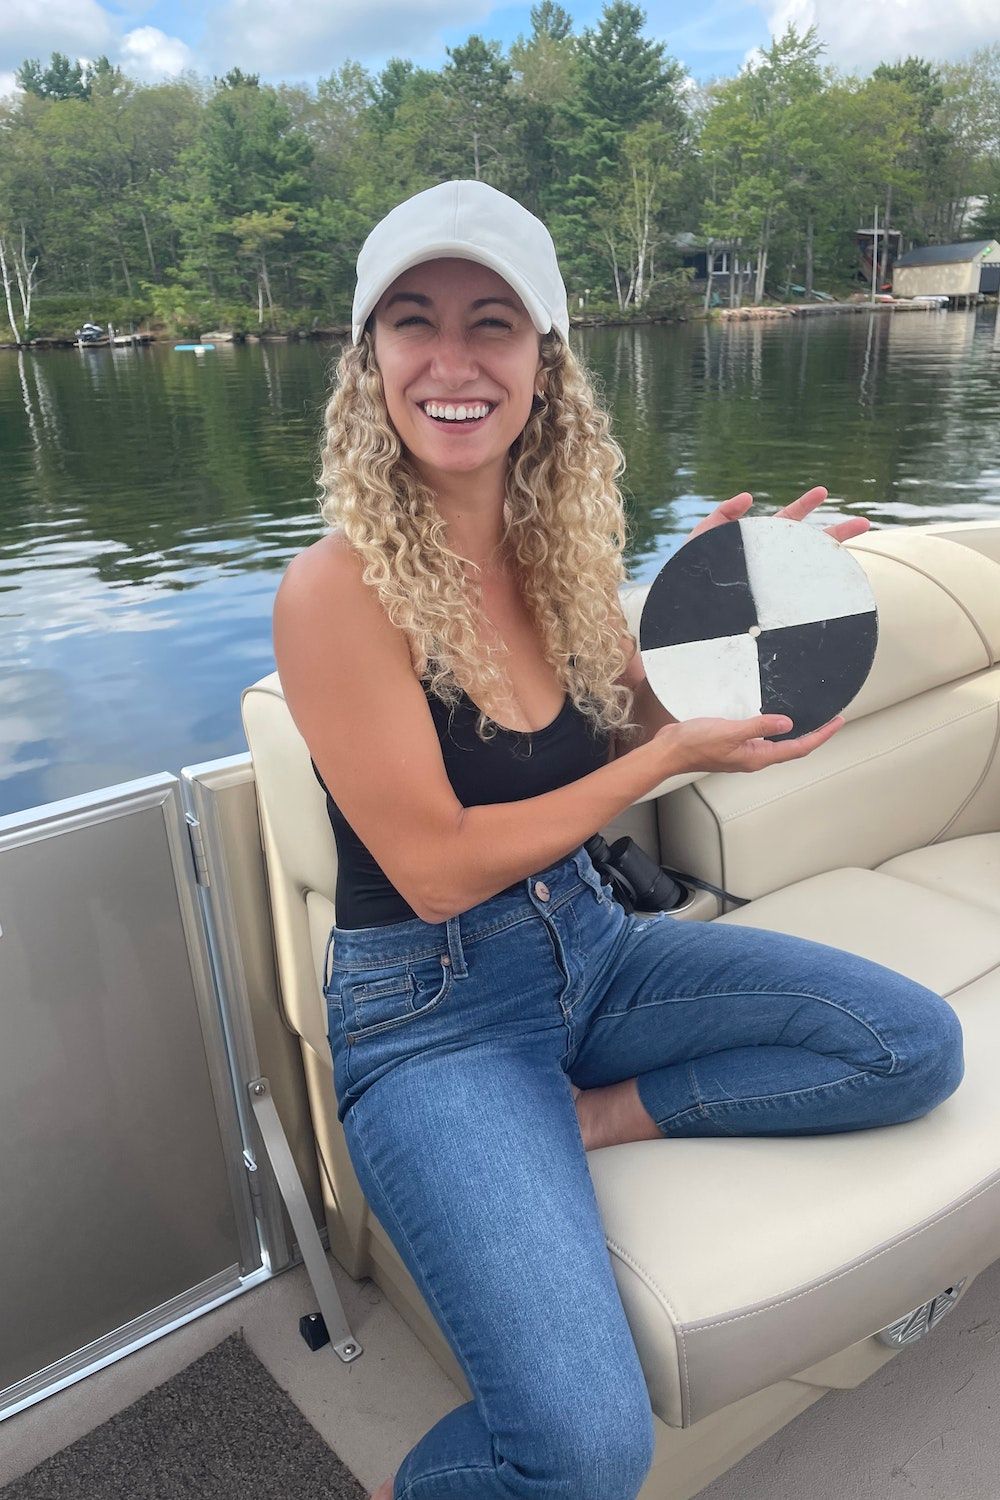 Liz Favot sits on a boat holding a secchi disk